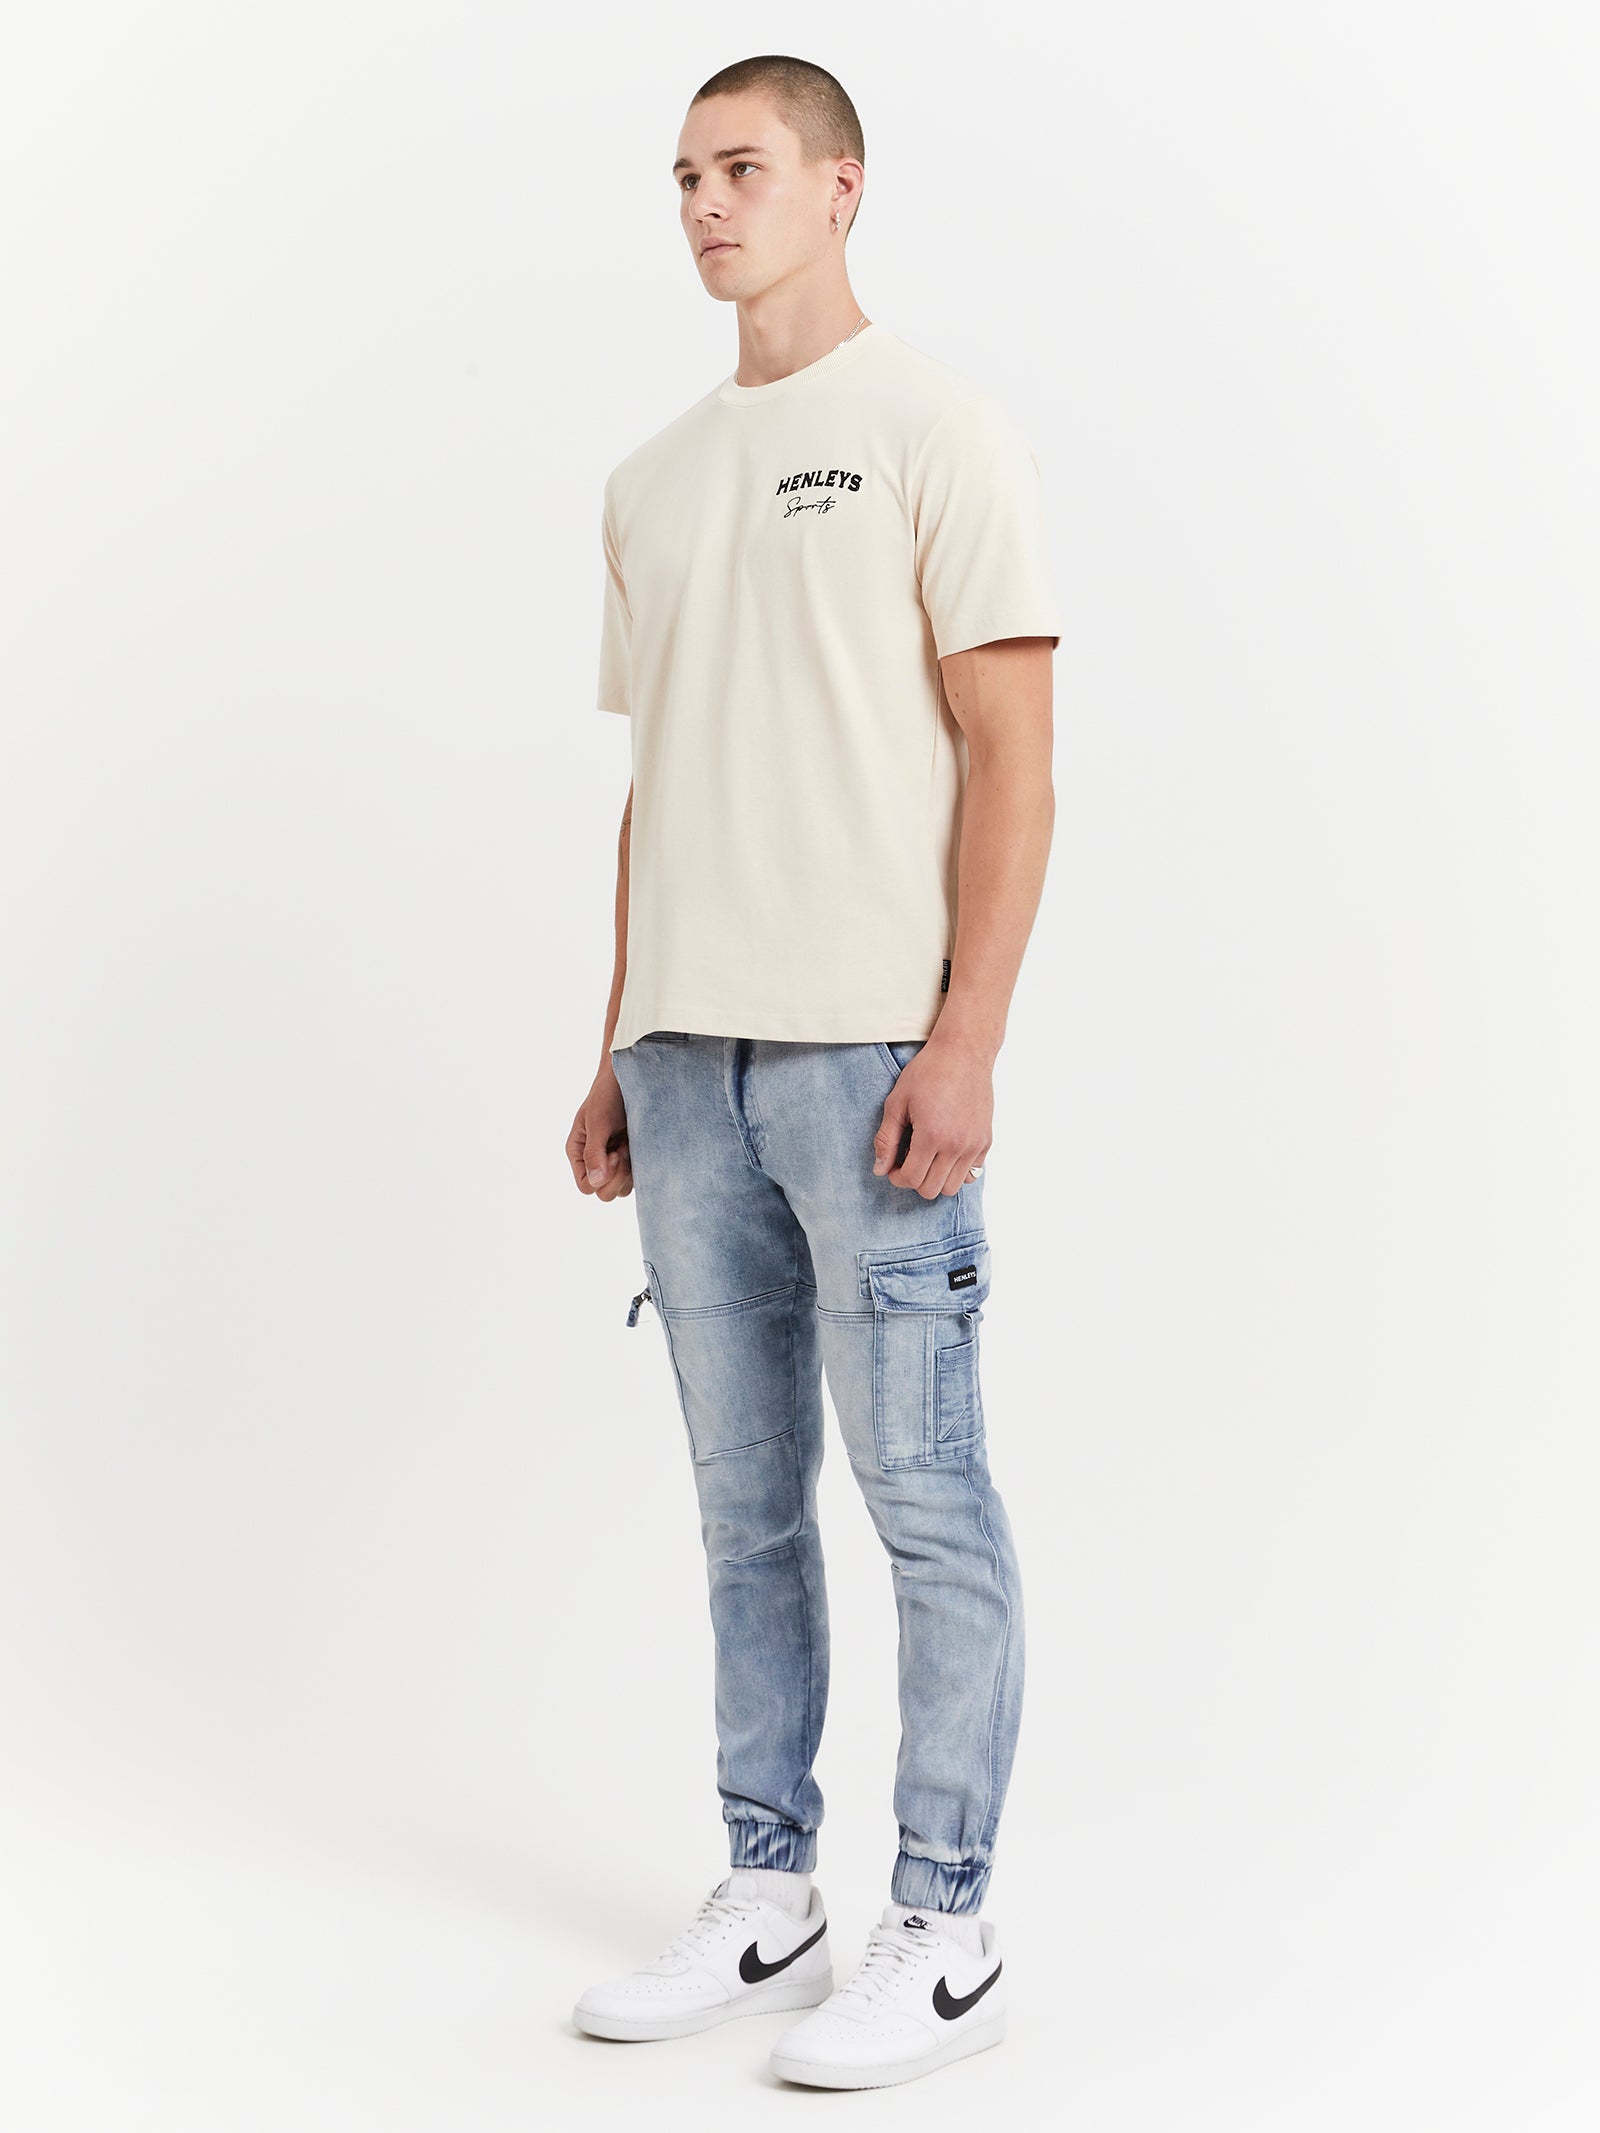 Club 2.0 T-Shirt in Off White